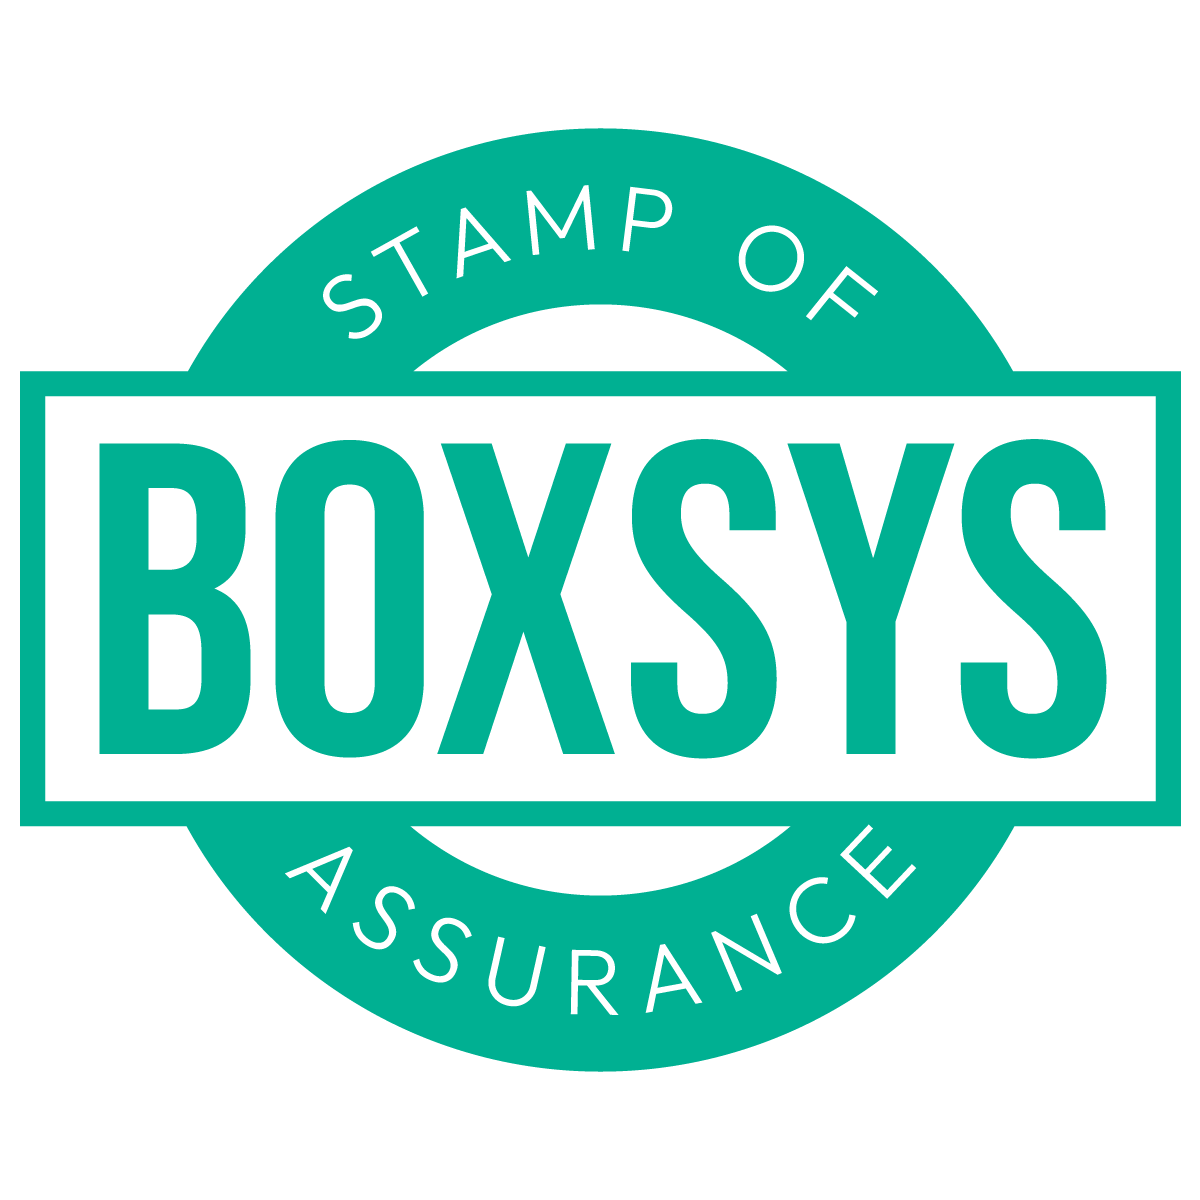 Boxsys Stamp of Assurance